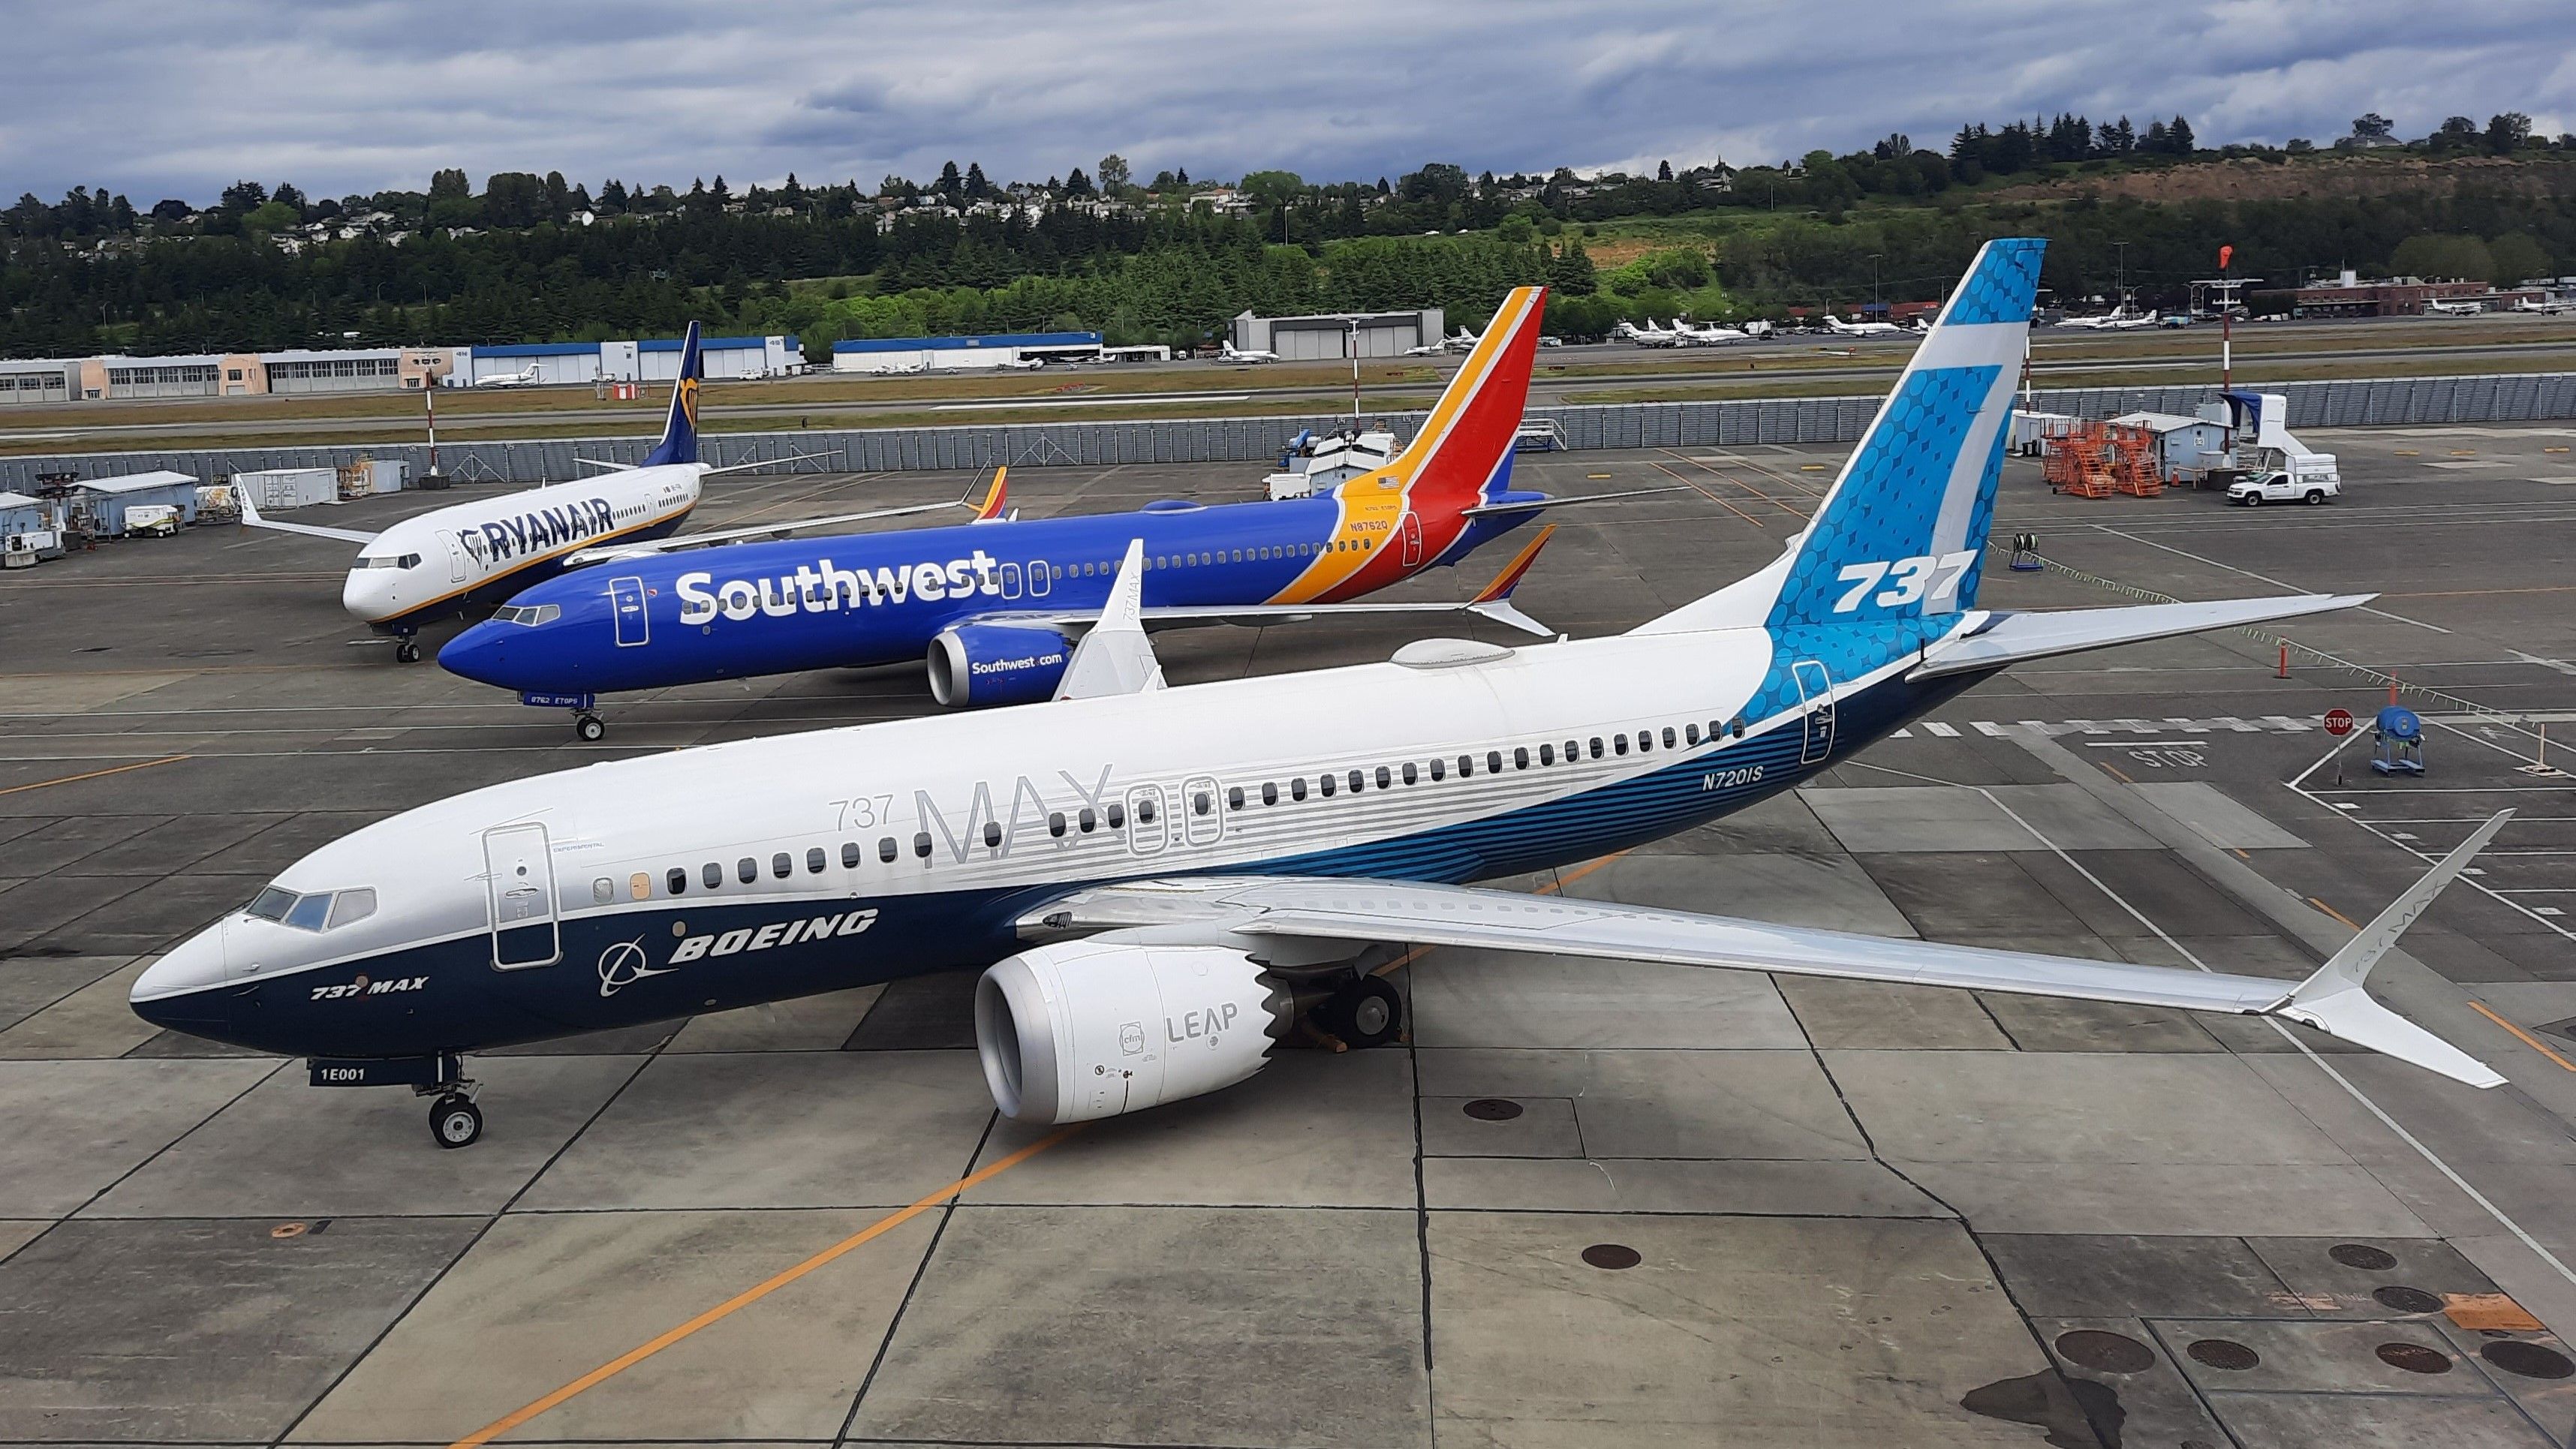 Three Boeing 737 MAX Family Aircraft Parked Together in Ryanair, Southwest, and house liveries.